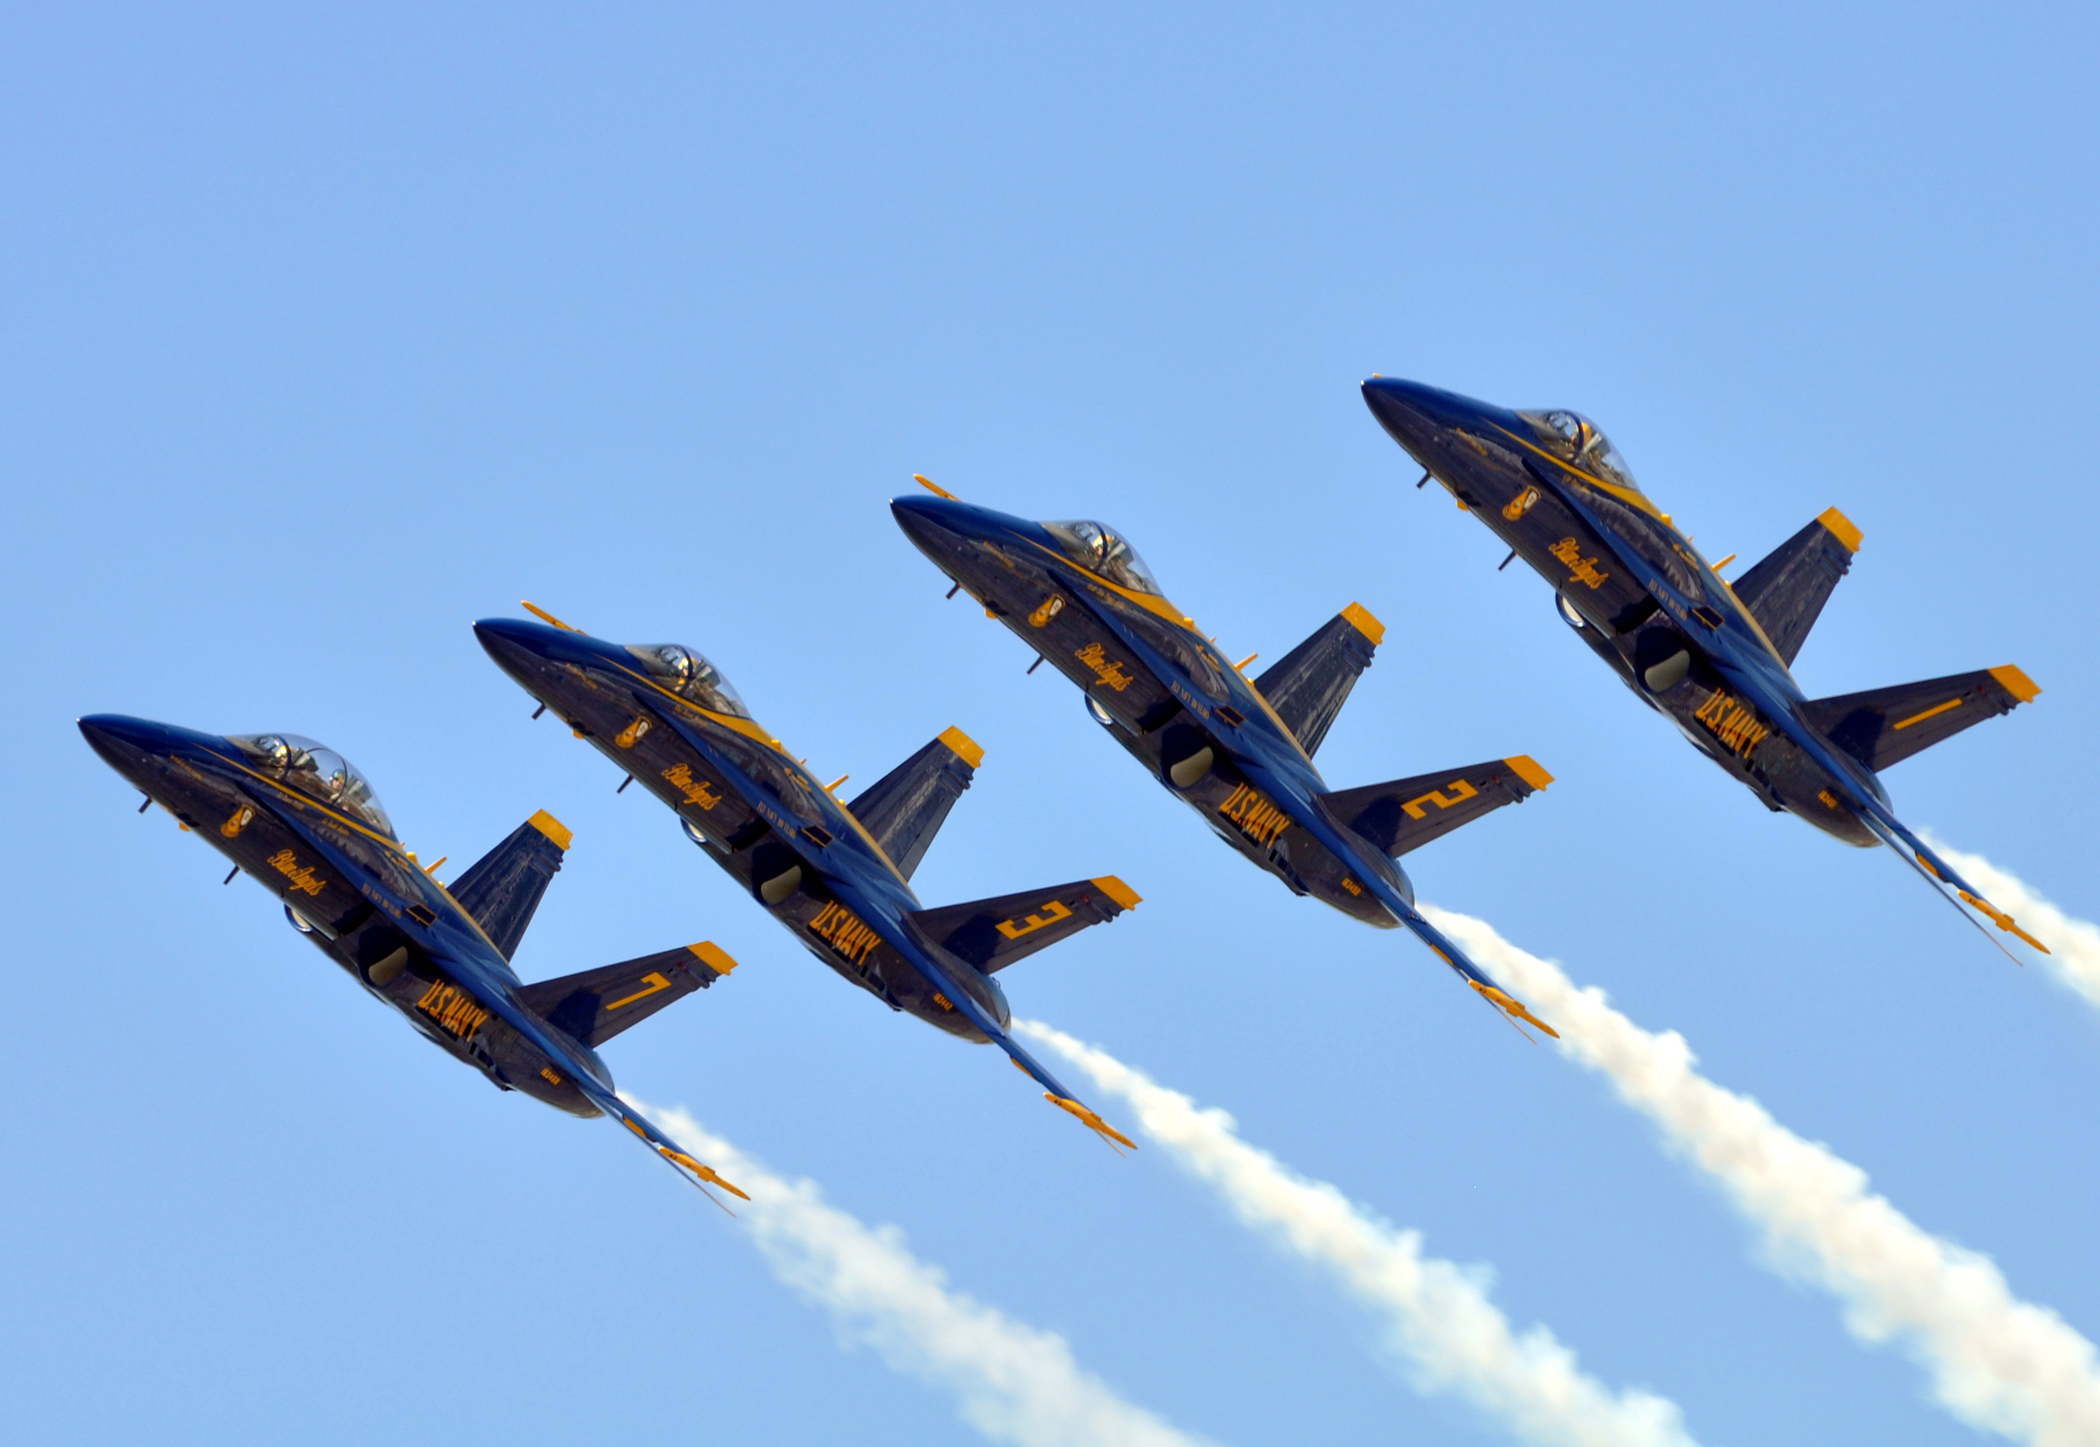 blue angels, military, air show, aircraft, airplane, mcdonnell douglas f/a 18 hornet, navy, smoke, military aircraft